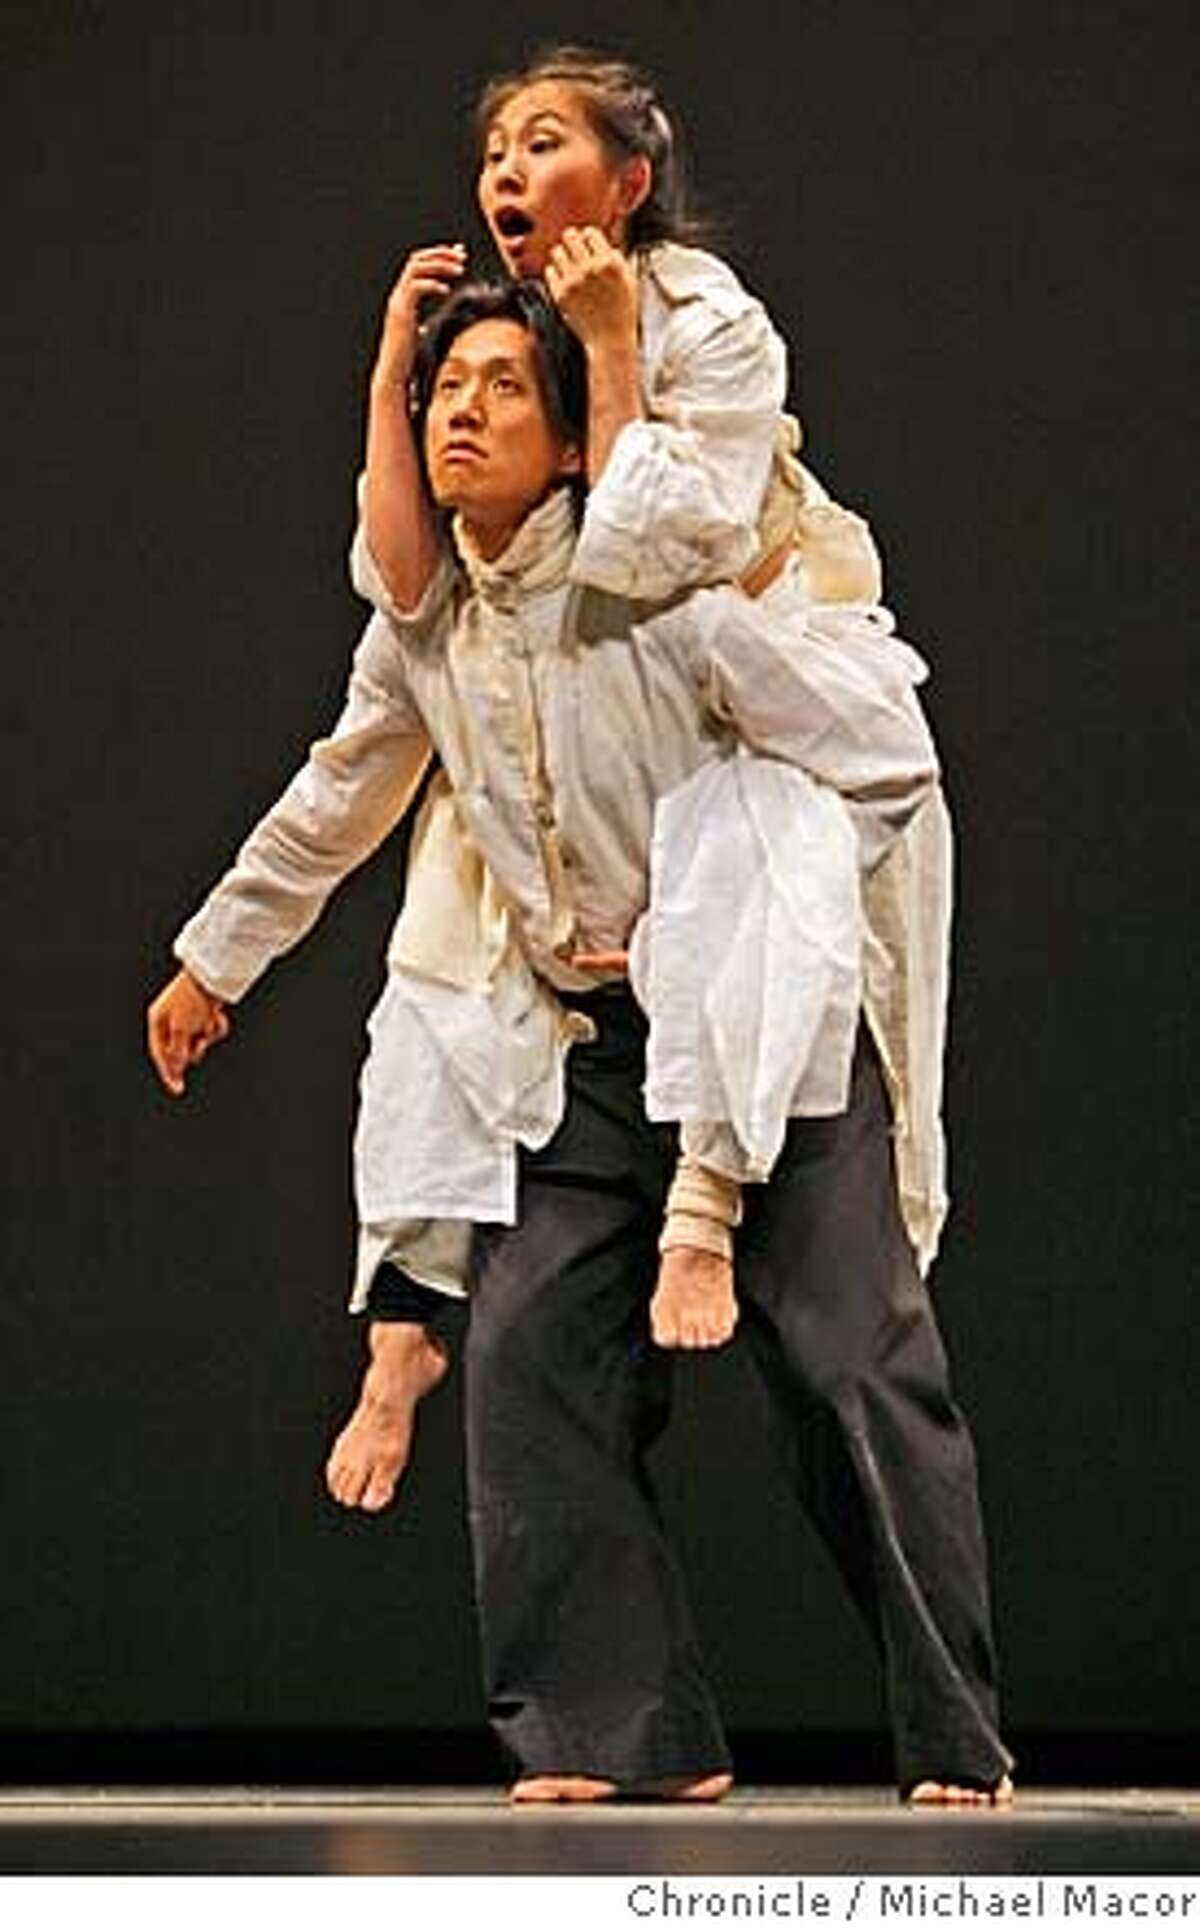 ###Live Caption:Dancers, Sherwood Chen and Dohee Lee, in the production of 'INKBOAT" at the Yerba Buena Center for the Arts in San Francisco, Calif., during rehersals on April 16, 2008. Photo by Michael Macor/ San Francisco Chronicle###Caption History:Dancers, Sherwood Chen and Dohee Lee, in the production of 'INKBOAT" at the Yerba Buena Center for the Arts in San Francisco, Calif., during rehersals on April 16, 2008. Photo by Michael Macor/ San Francisco Chronicle###Notes:Local choregrapher Shinichi lova-Koga brings his world premire of "inkBoat", to the Yerba Buena Center for the Arts.###Special Instructions:Mandatory credit for Photographer and San Francisco Chronicle No sales/ Magazines Out